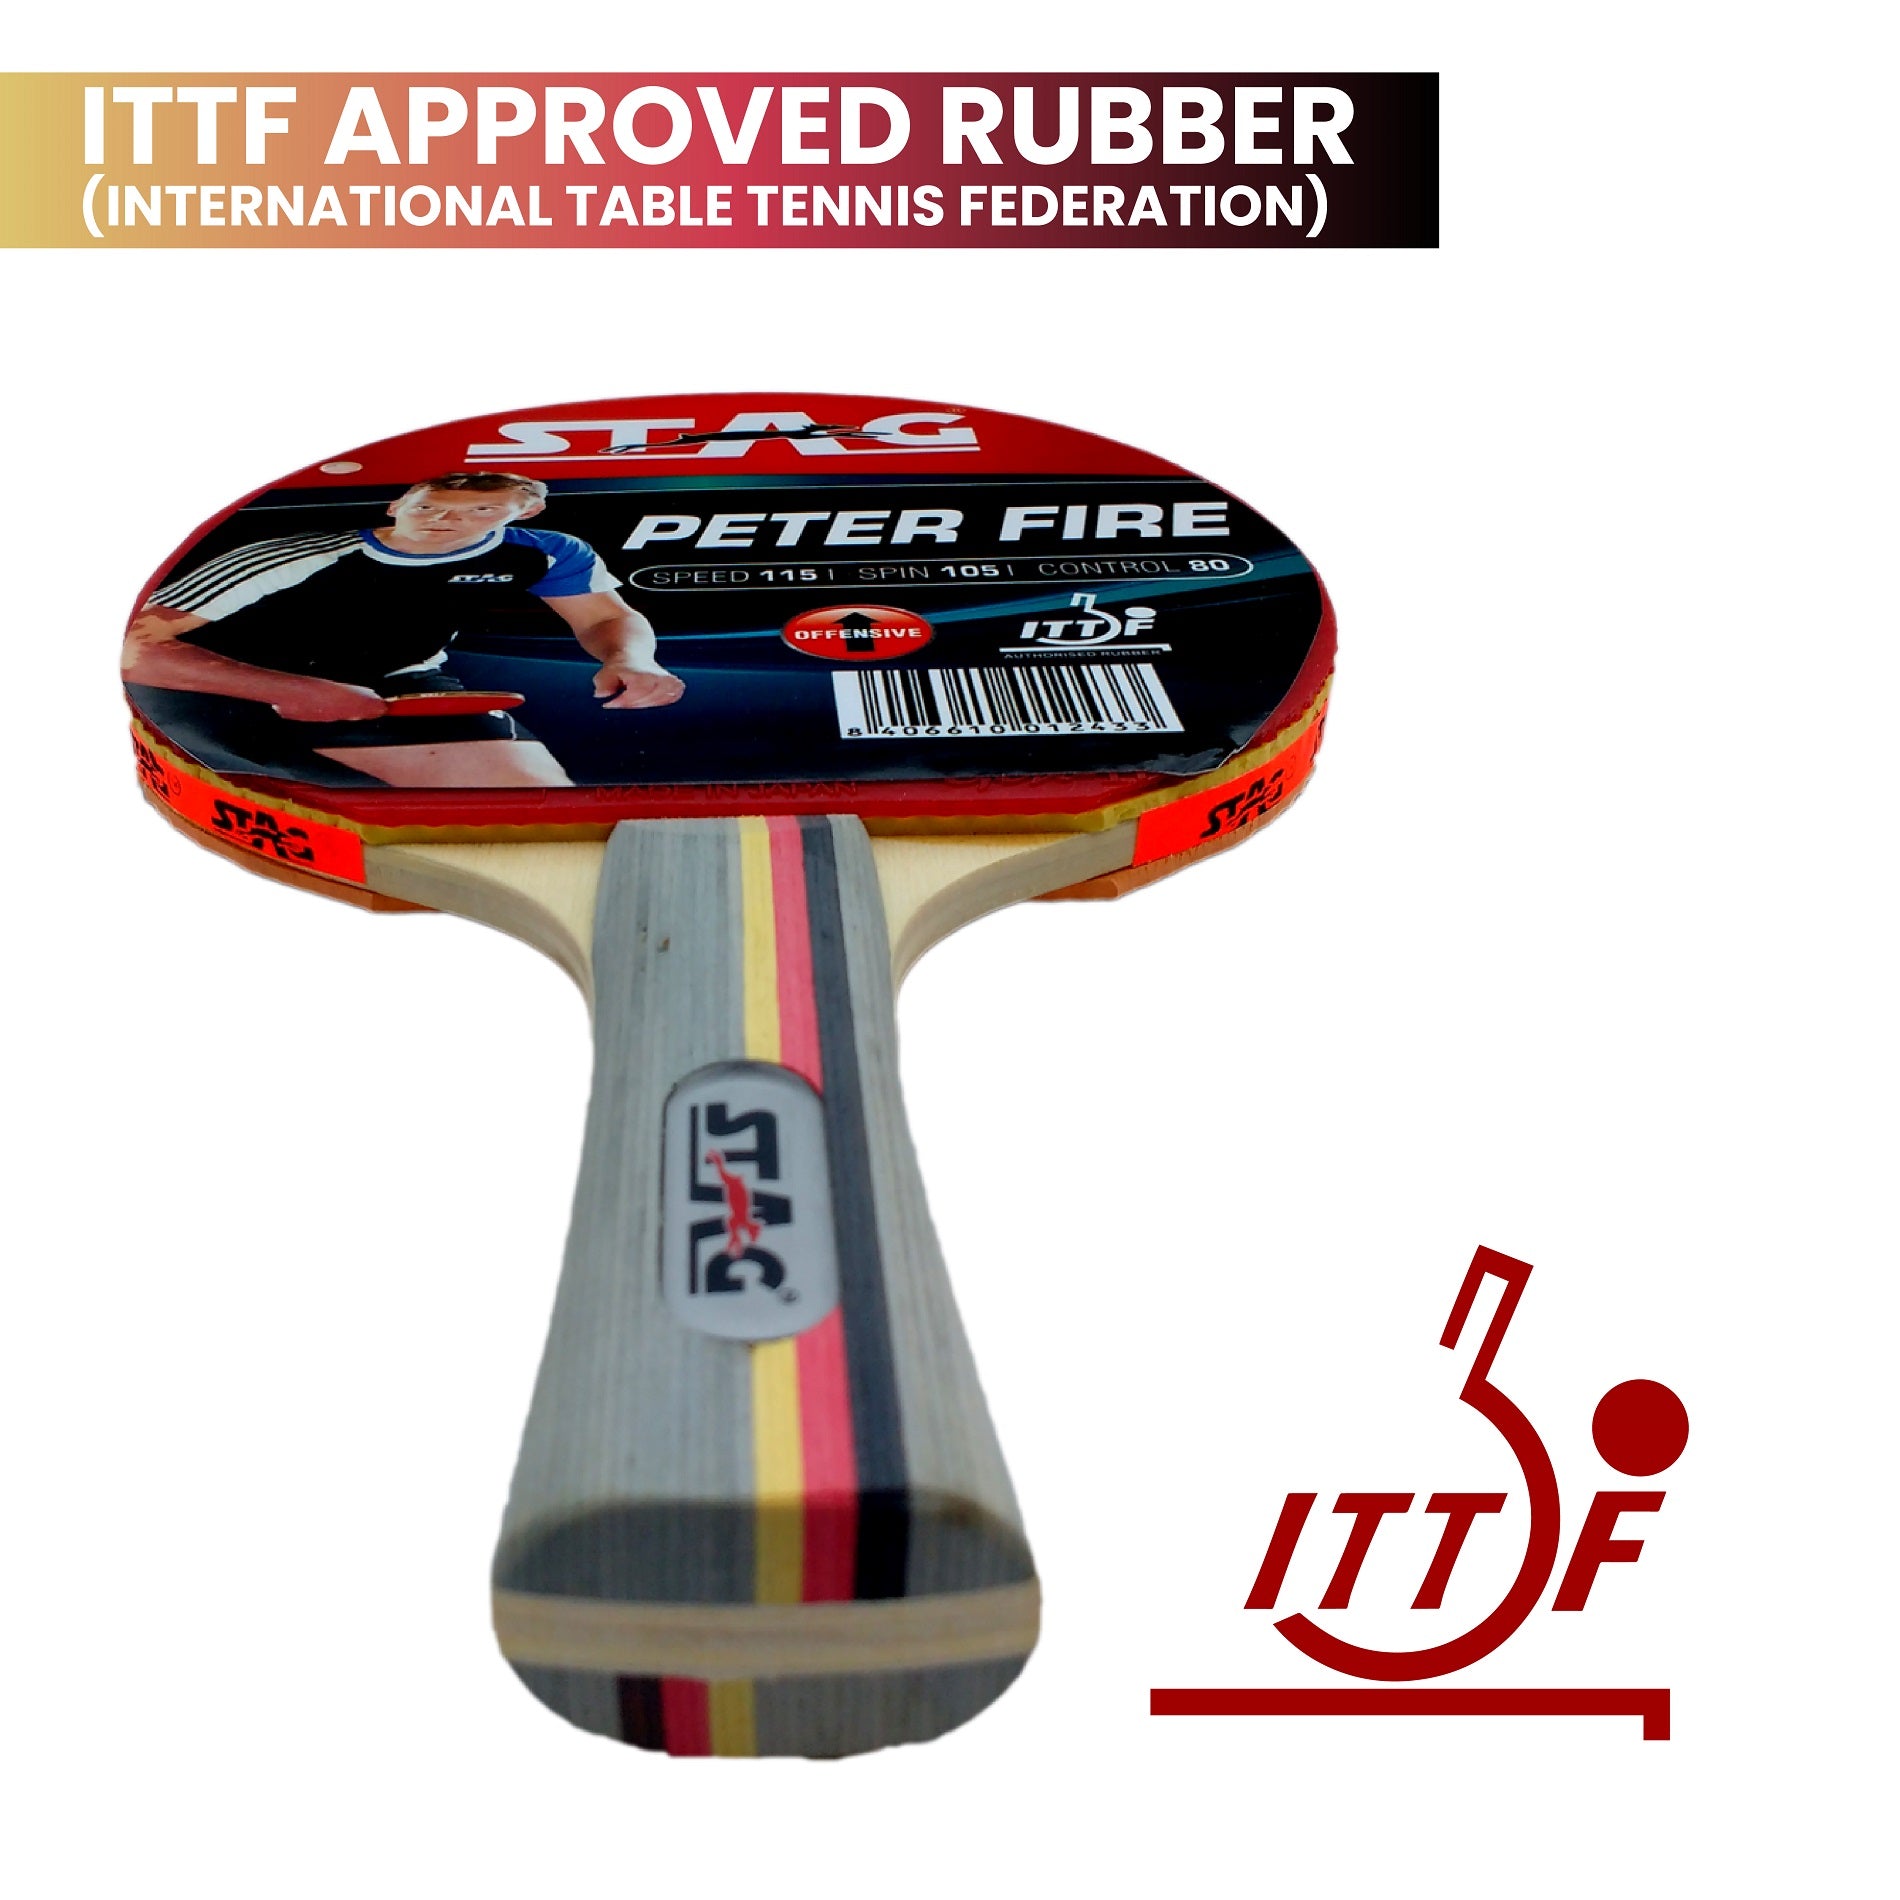 Peter Fire Table Tennis Racquet with wooden box